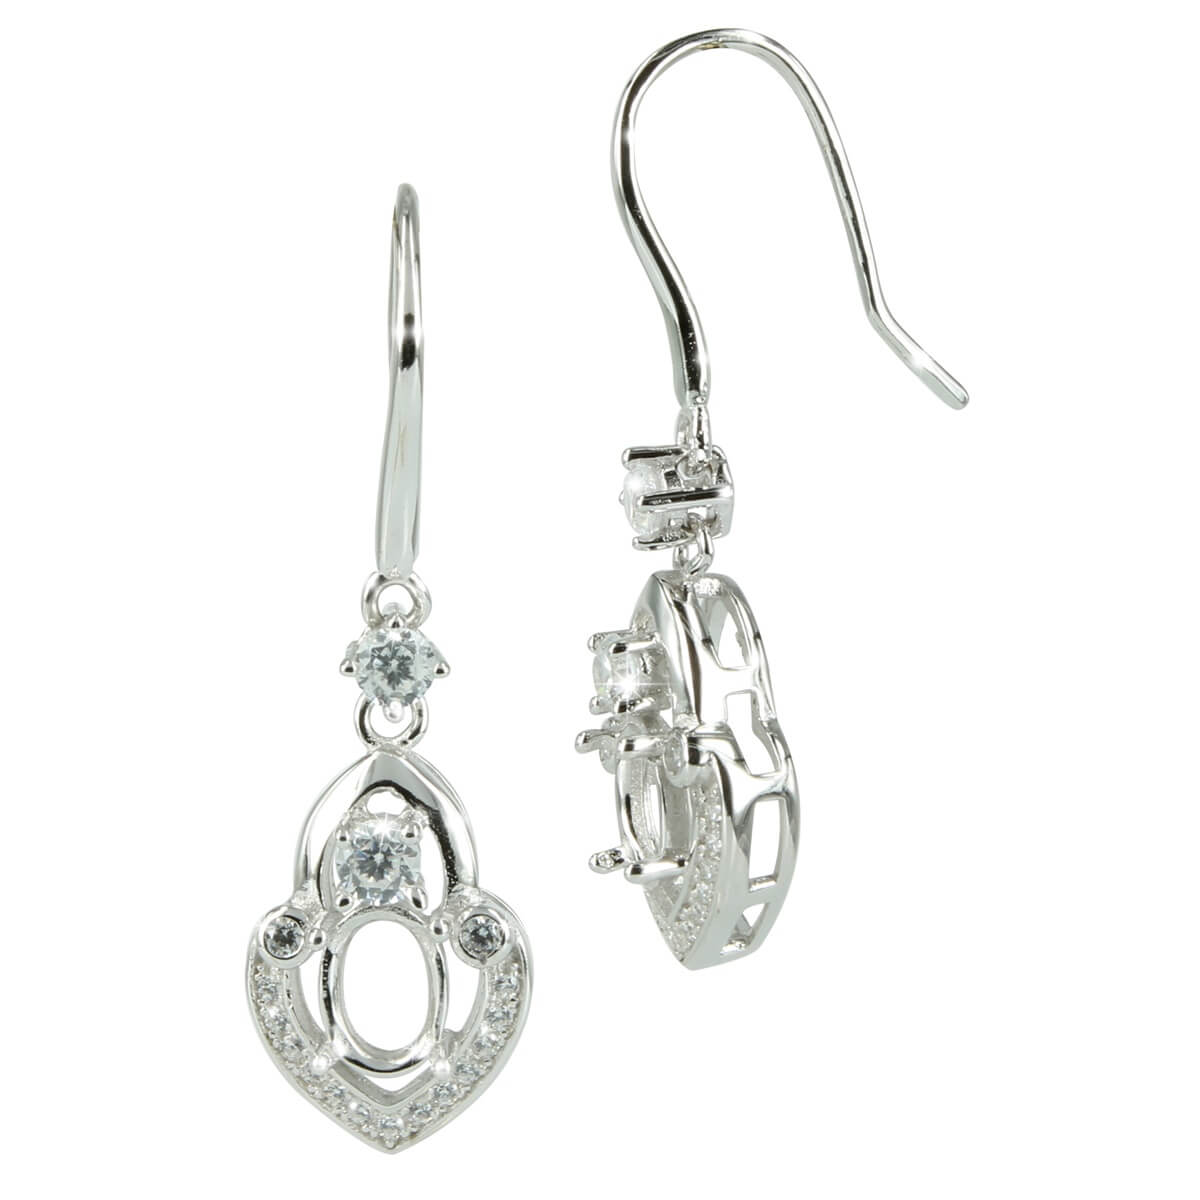 Cathedral Earrings with Oval Setting in Sterling Silver for 5x7mm Oval Stones